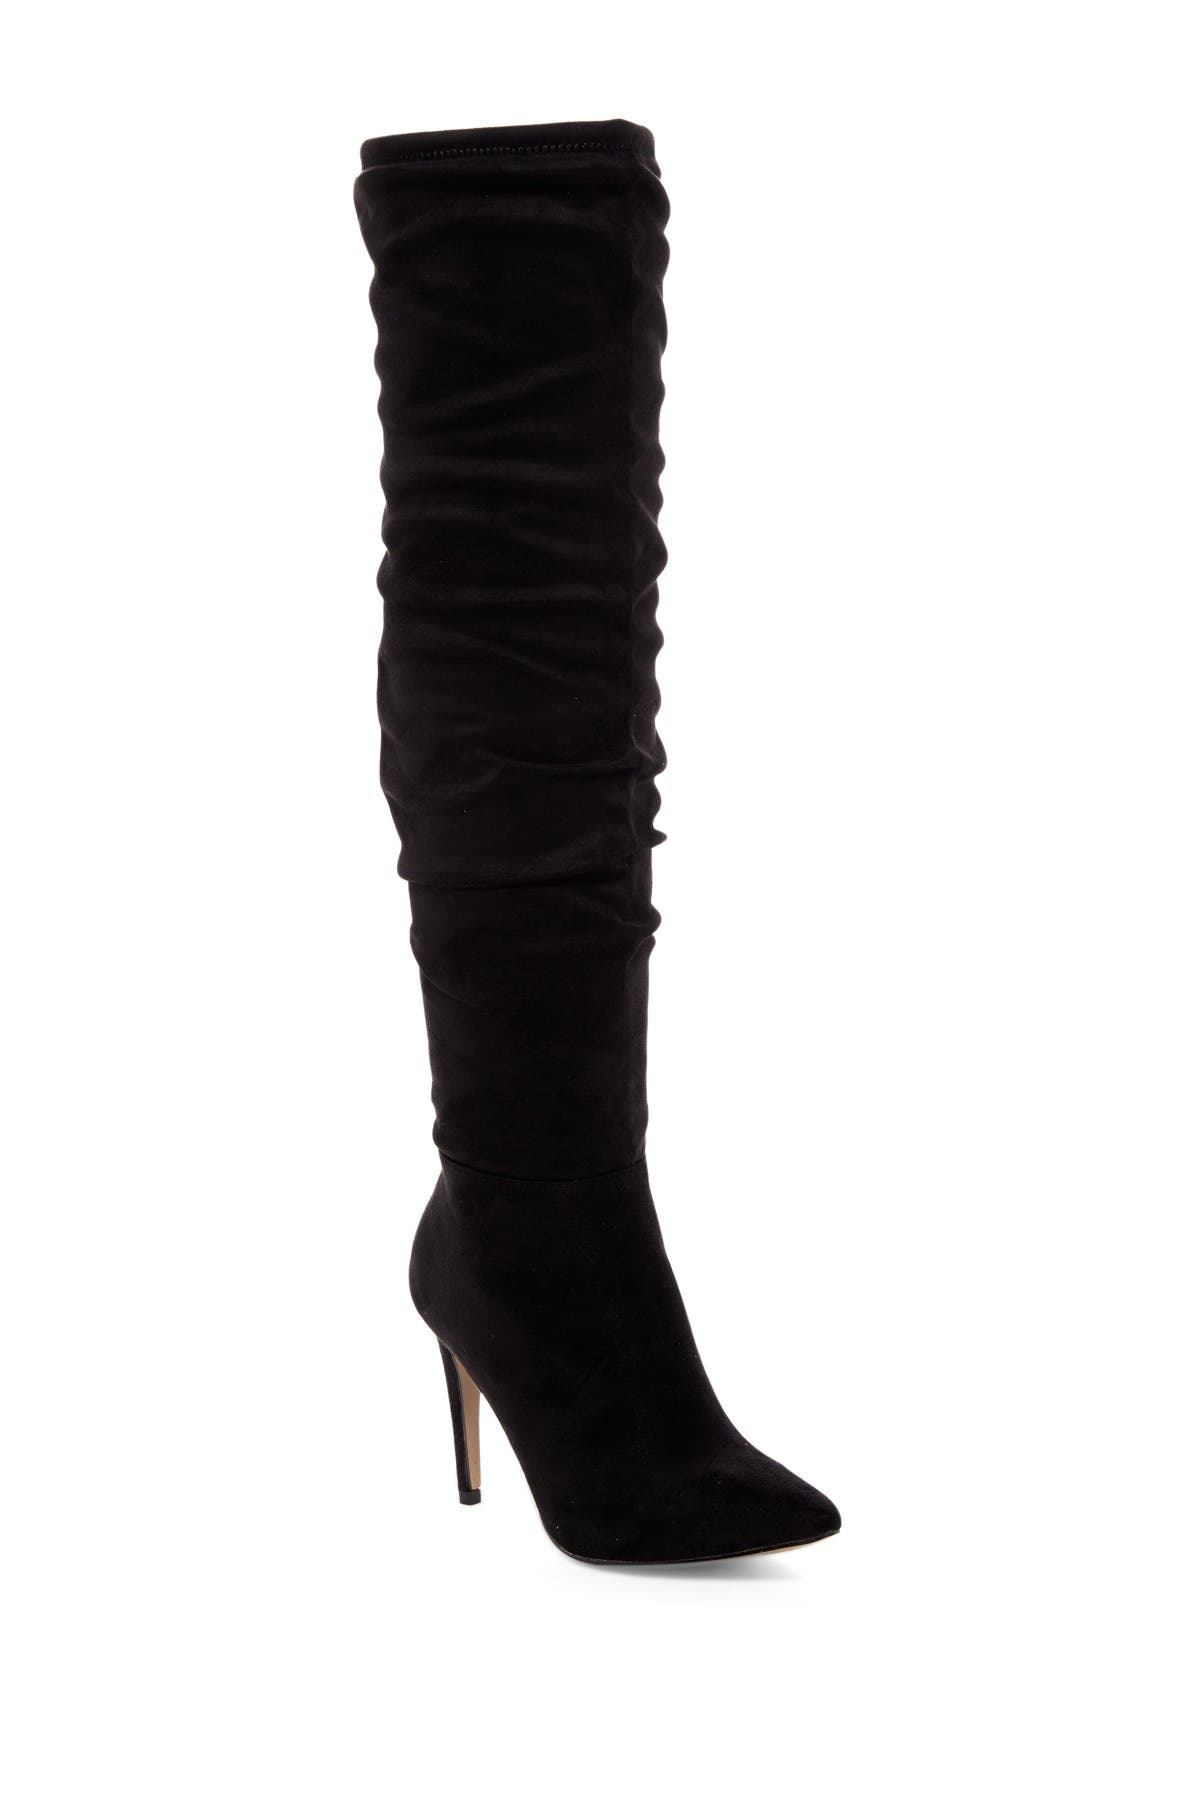 nordstrom rack over the knee boots